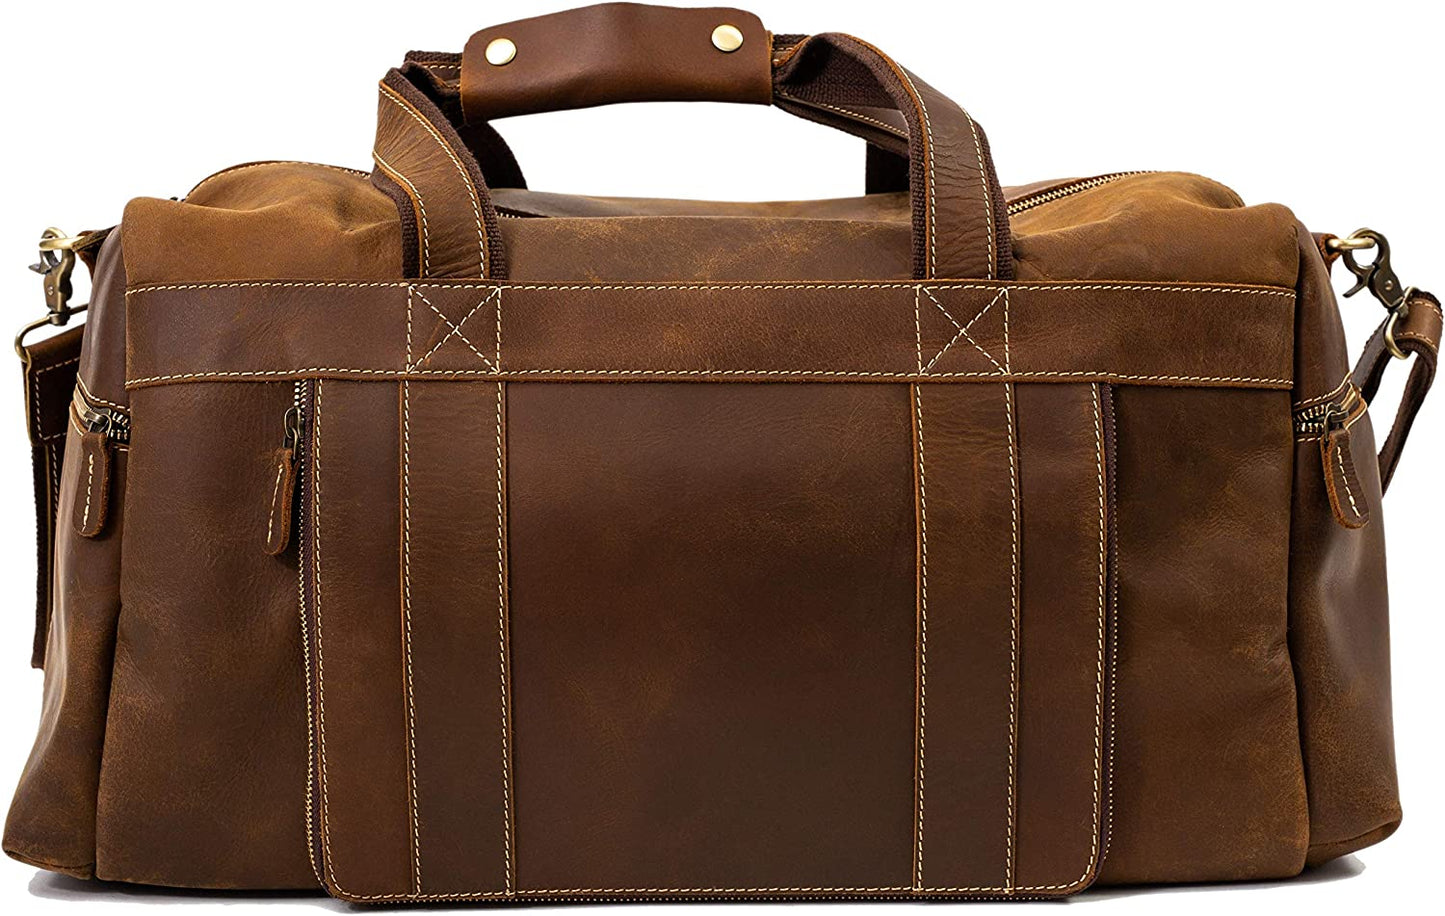 Genuine Leather Travel Duffel Bag | Oversized Weekend Luggage | Buffalo Leather Duffle Bag for Men / Women | Sports Gym Overnight Carry-On Bag | Great Gift Idea